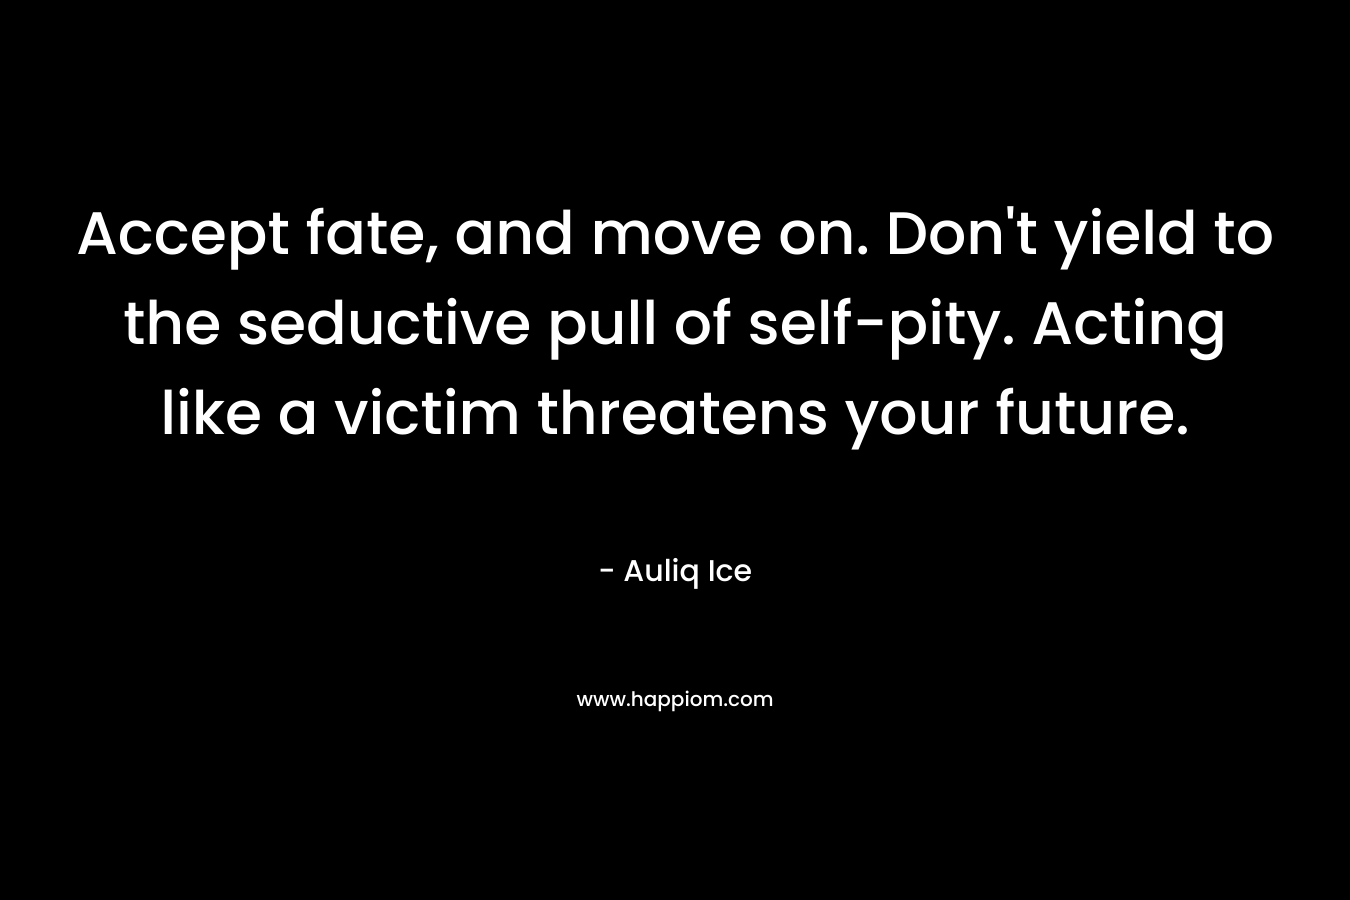 Accept fate, and move on. Don't yield to the seductive pull of self-pity. Acting like a victim threatens your future.